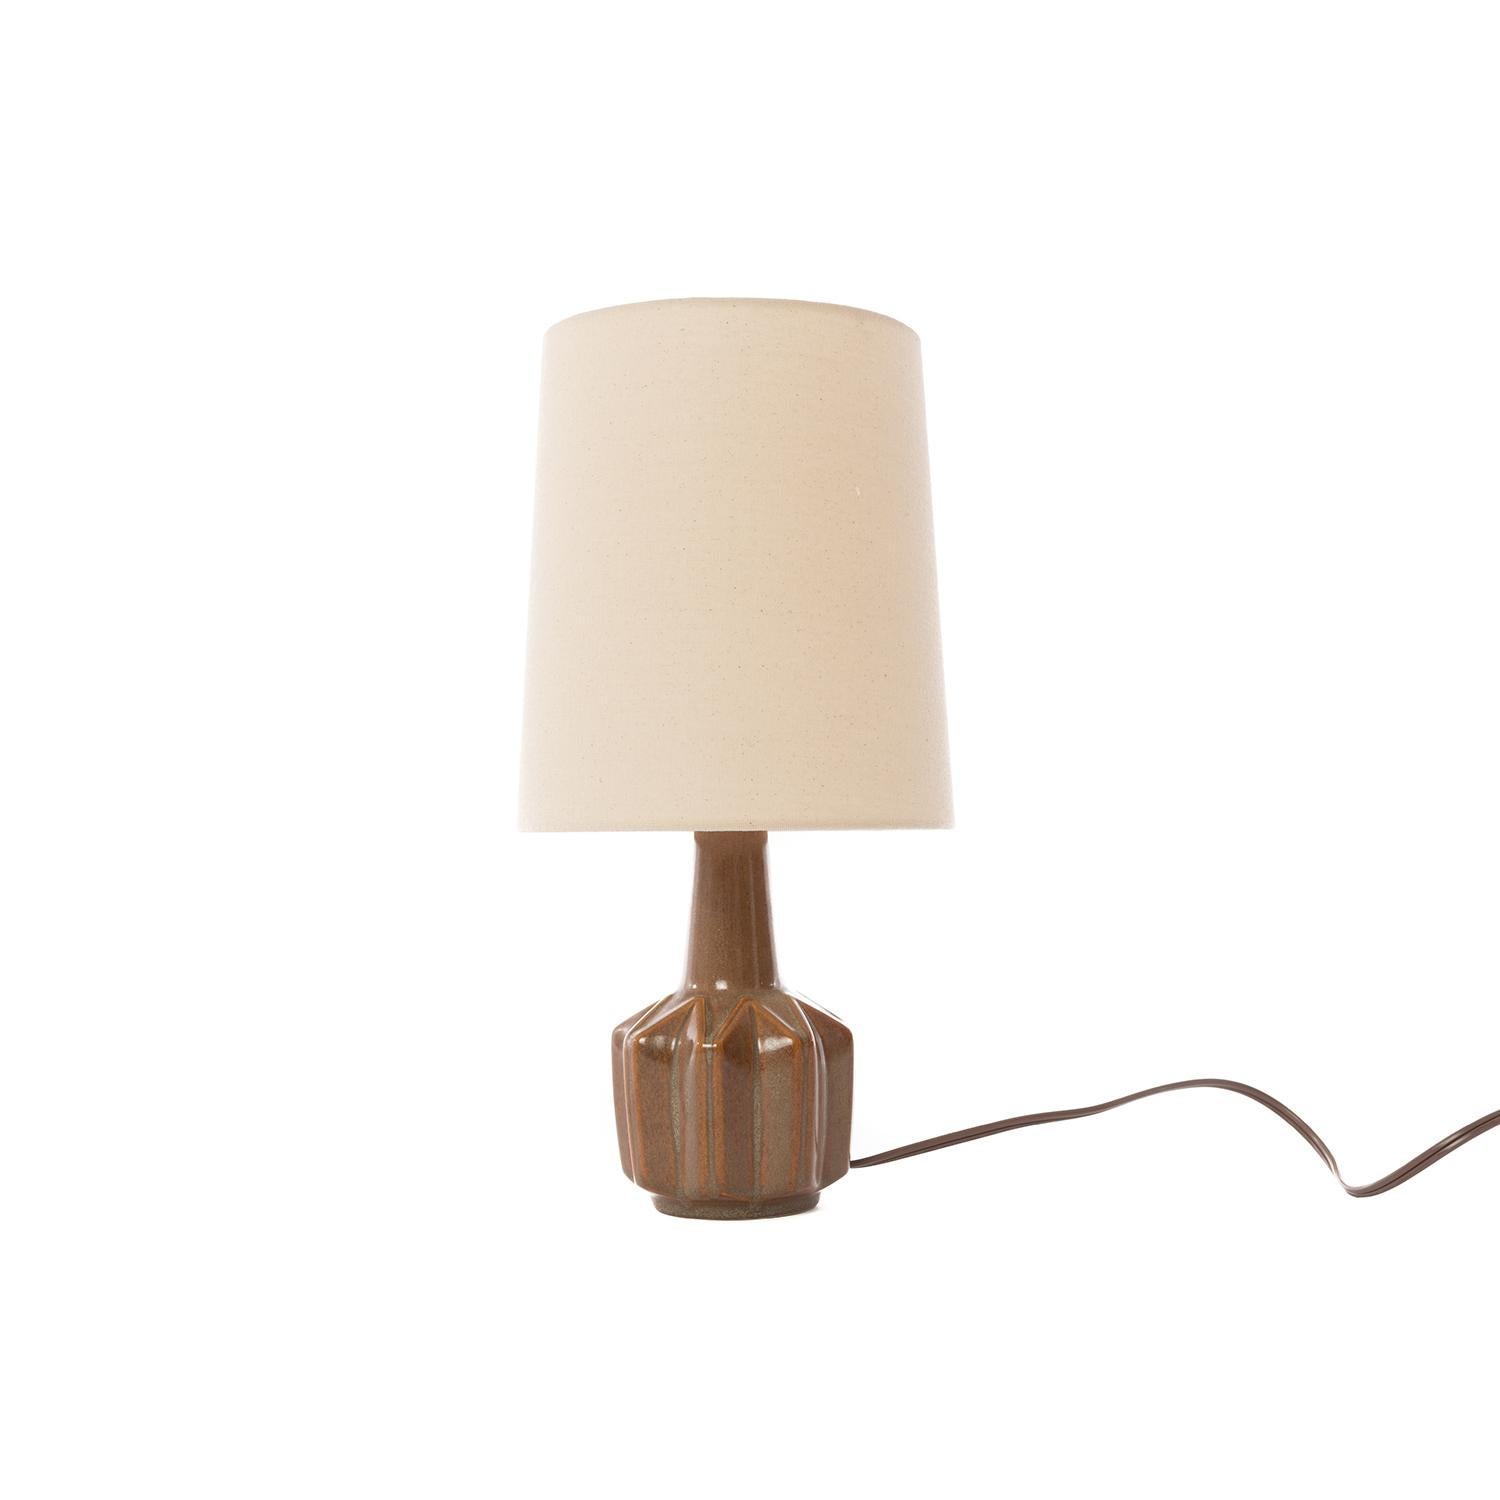 This diminutive table lamp has a channeled, star shaped base with a wheat and pumpkin colored glaze. New natural linen shade, brass switch and updated North American wiring. Artist-signed, 1952. Base is 4